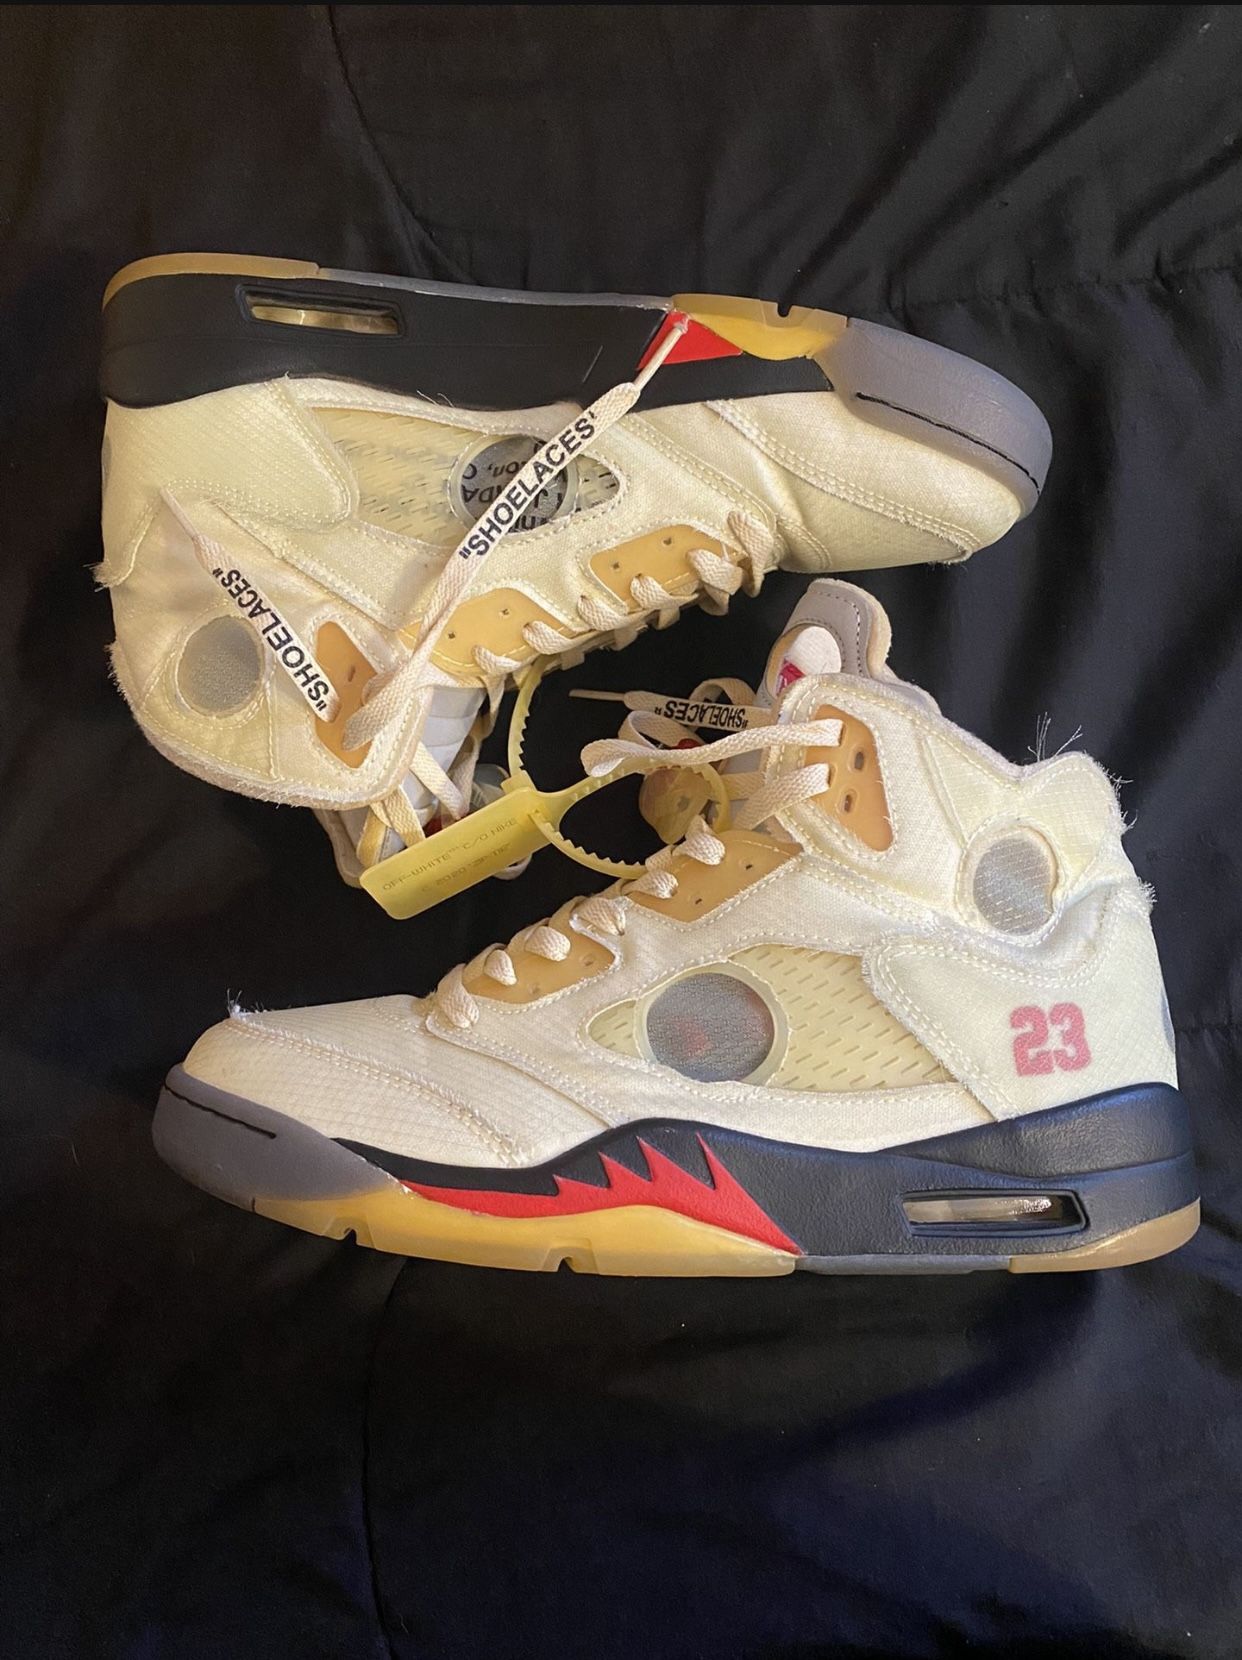 HOW TO WEAR THE AIR JORDAN 5 OFF WHITE SAIL (DOs and DONTs) 